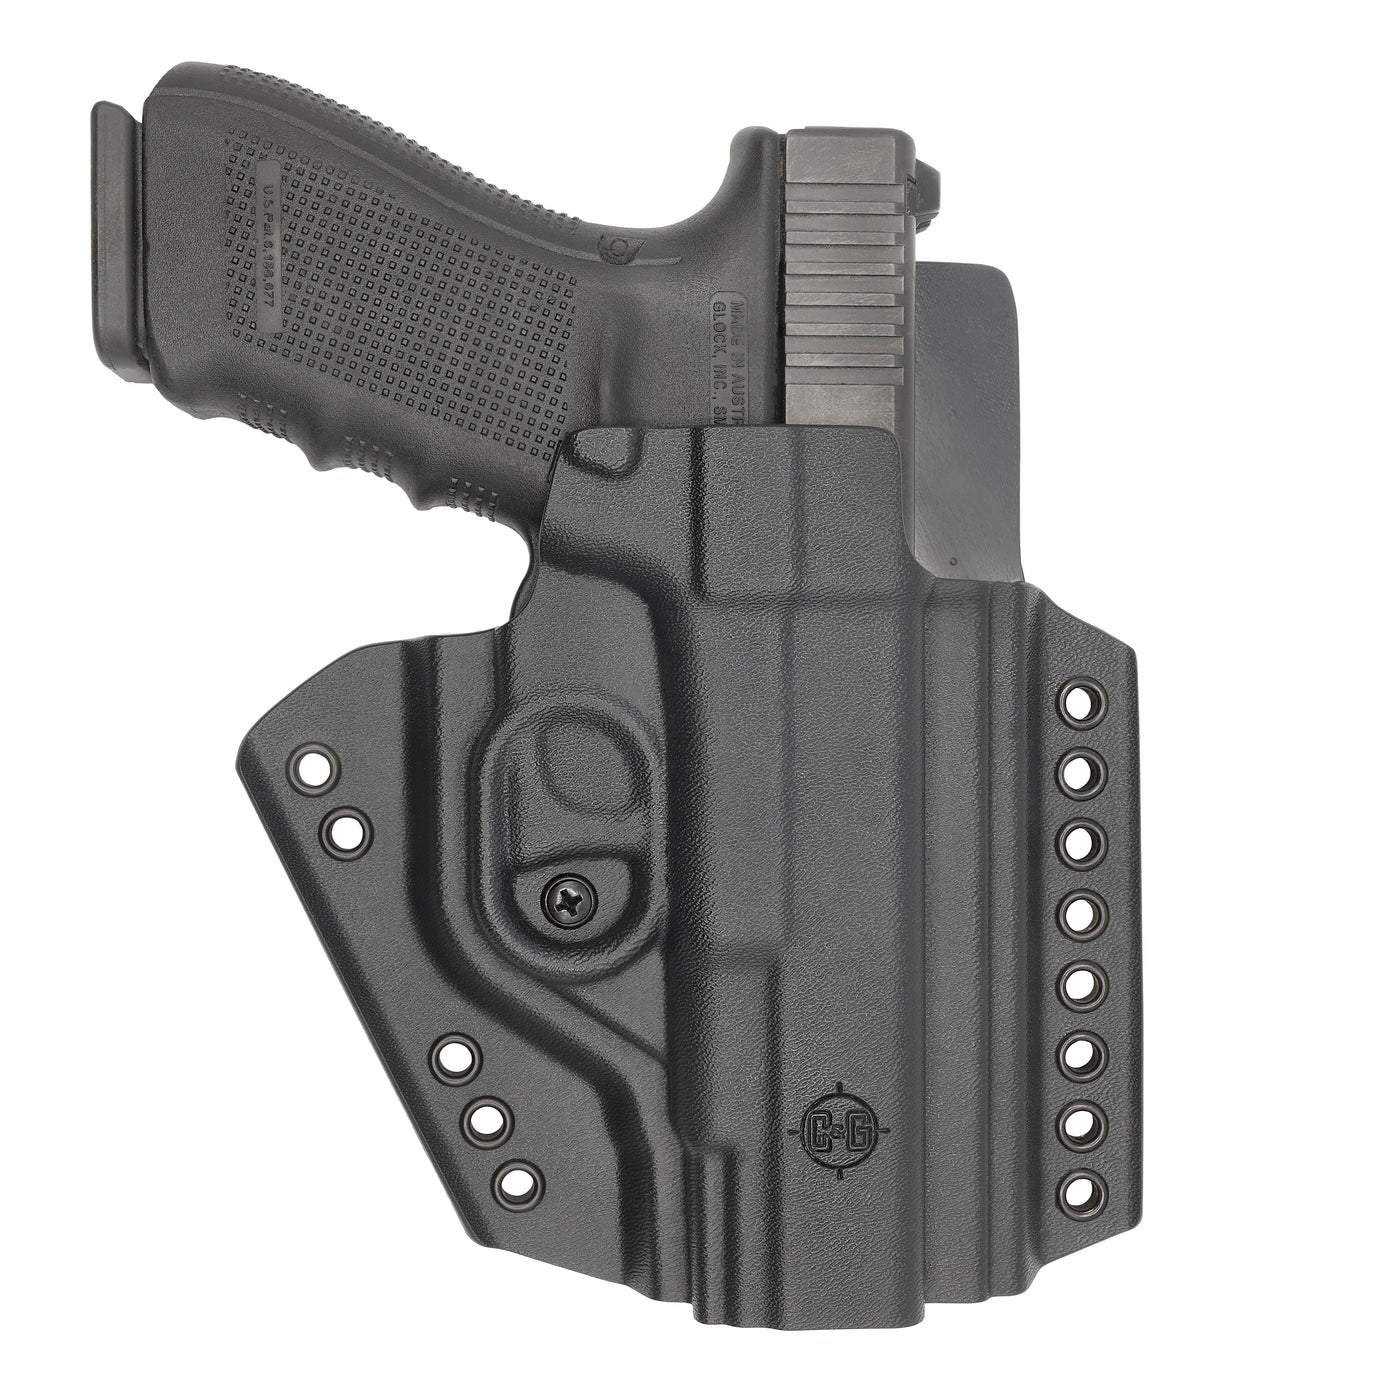 C&G Holsters quickship chest mounted system Glock 20/21 holstered